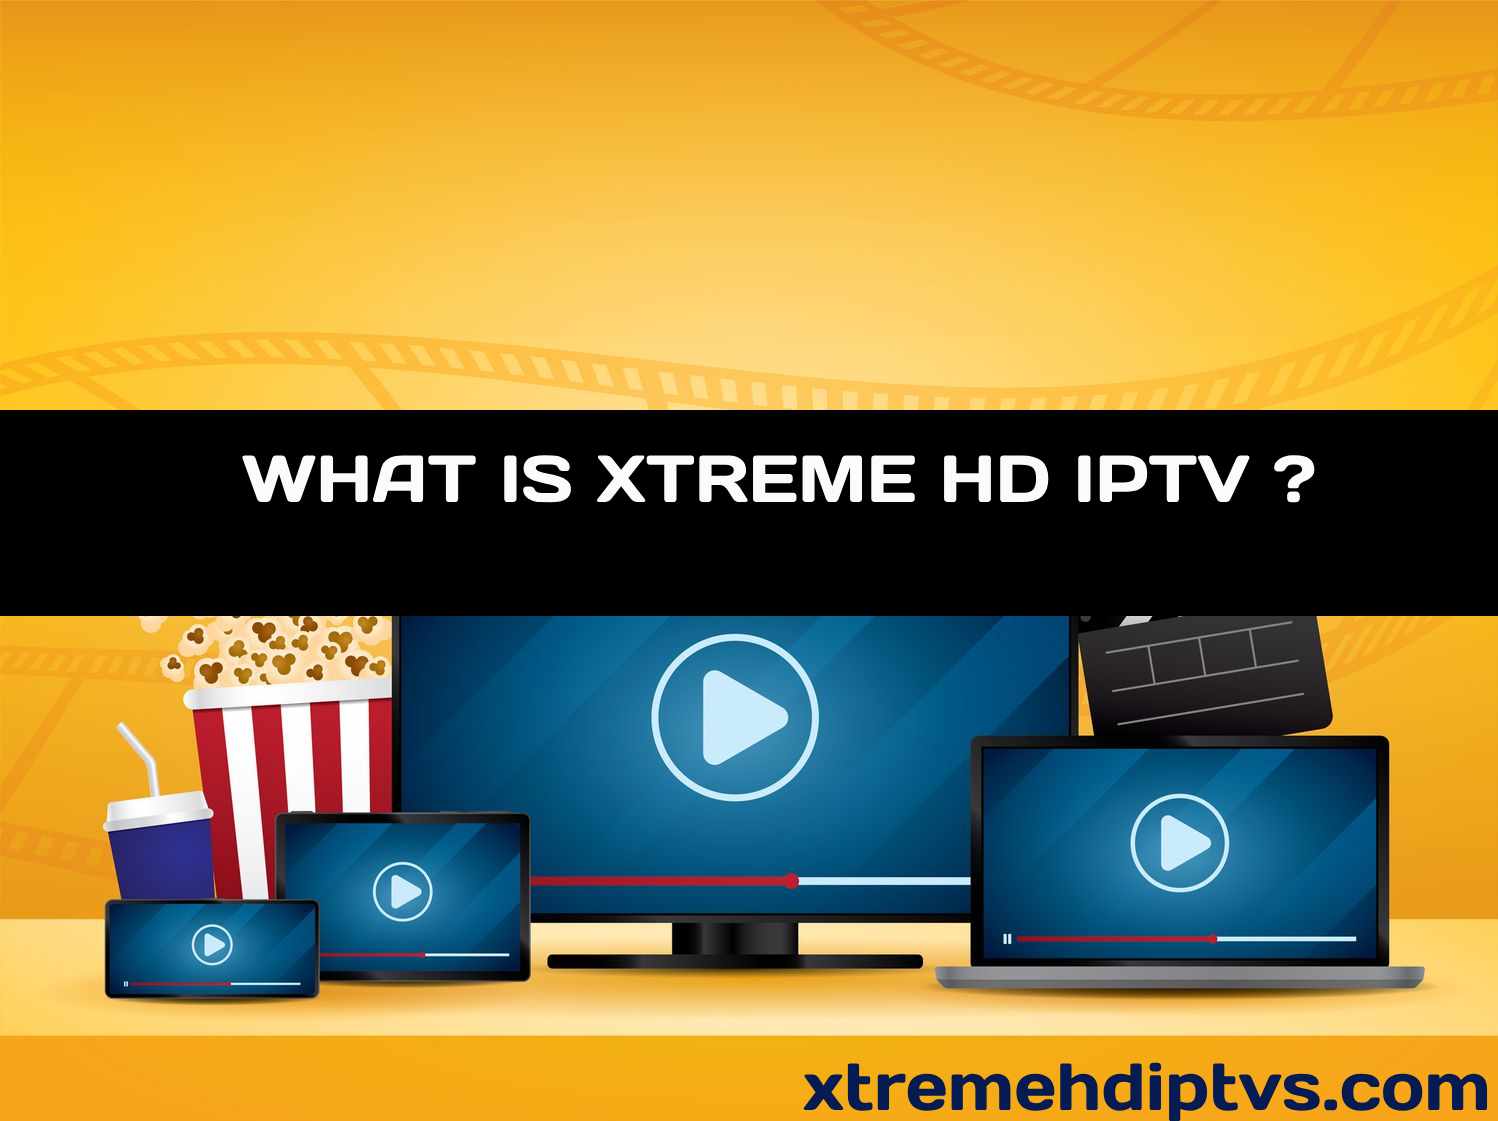 WHAT IS XTREME HD IPTV